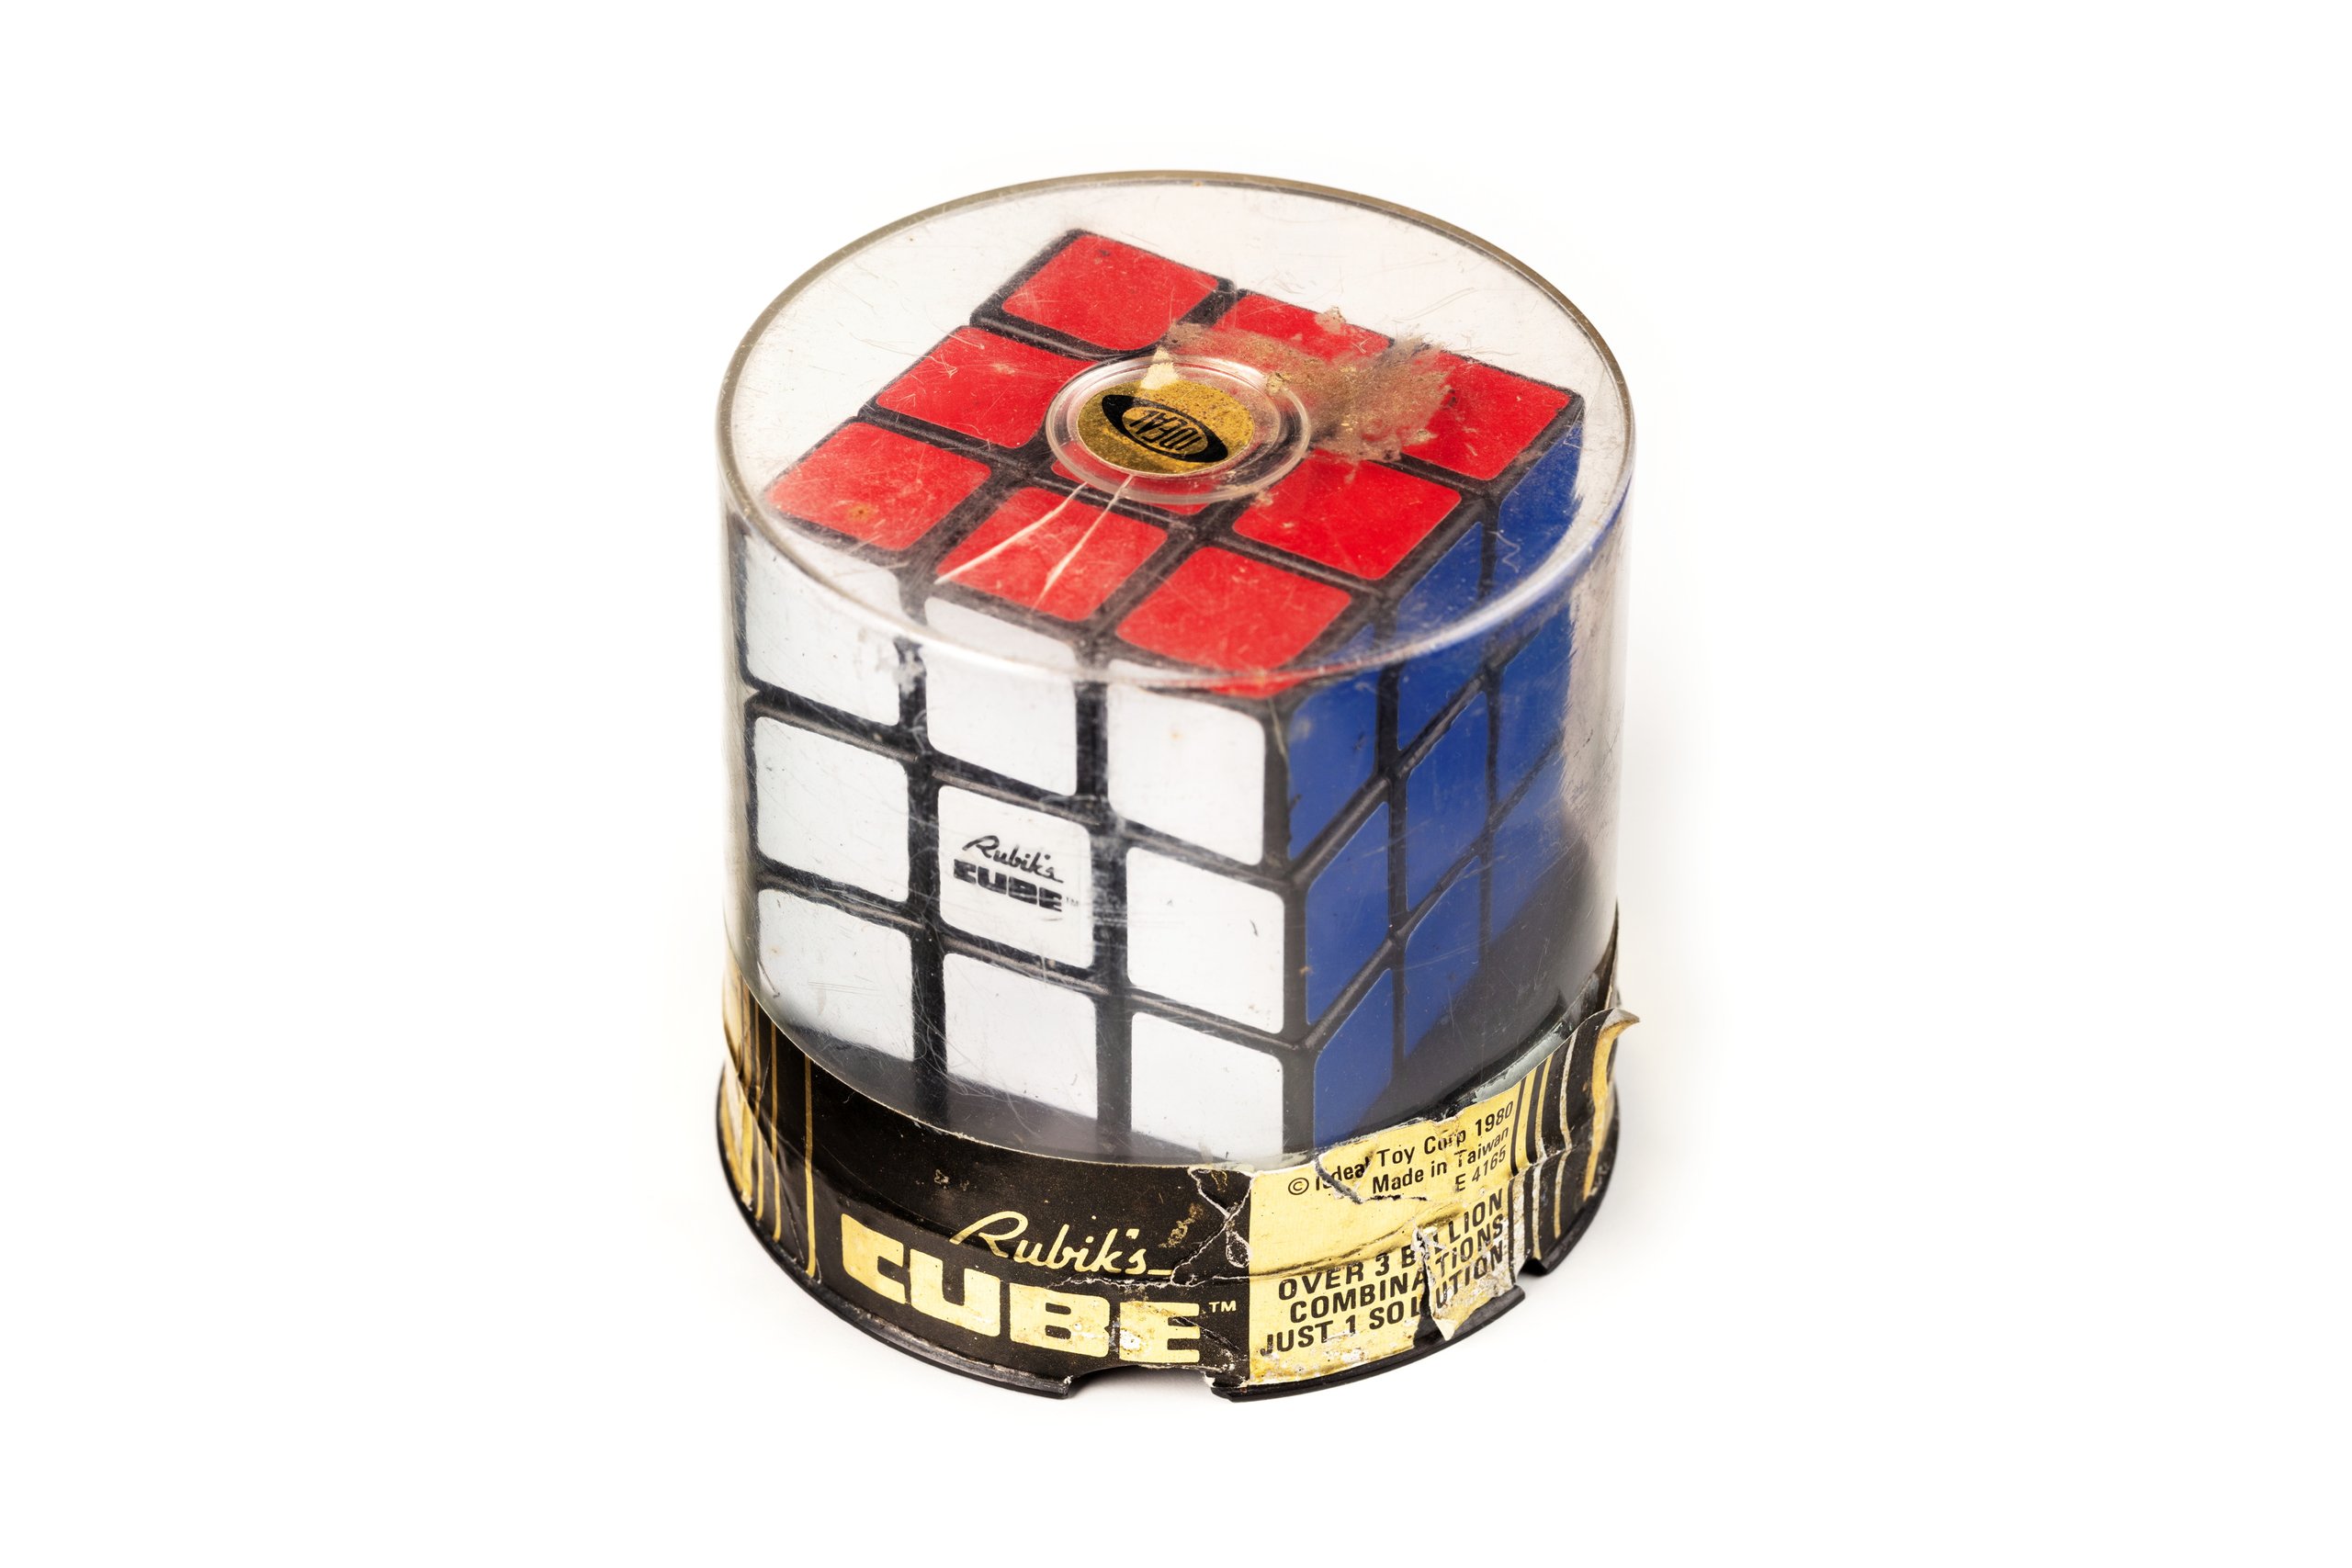 Rubik's Cube puzzle in packaging designed by Erno Rubik